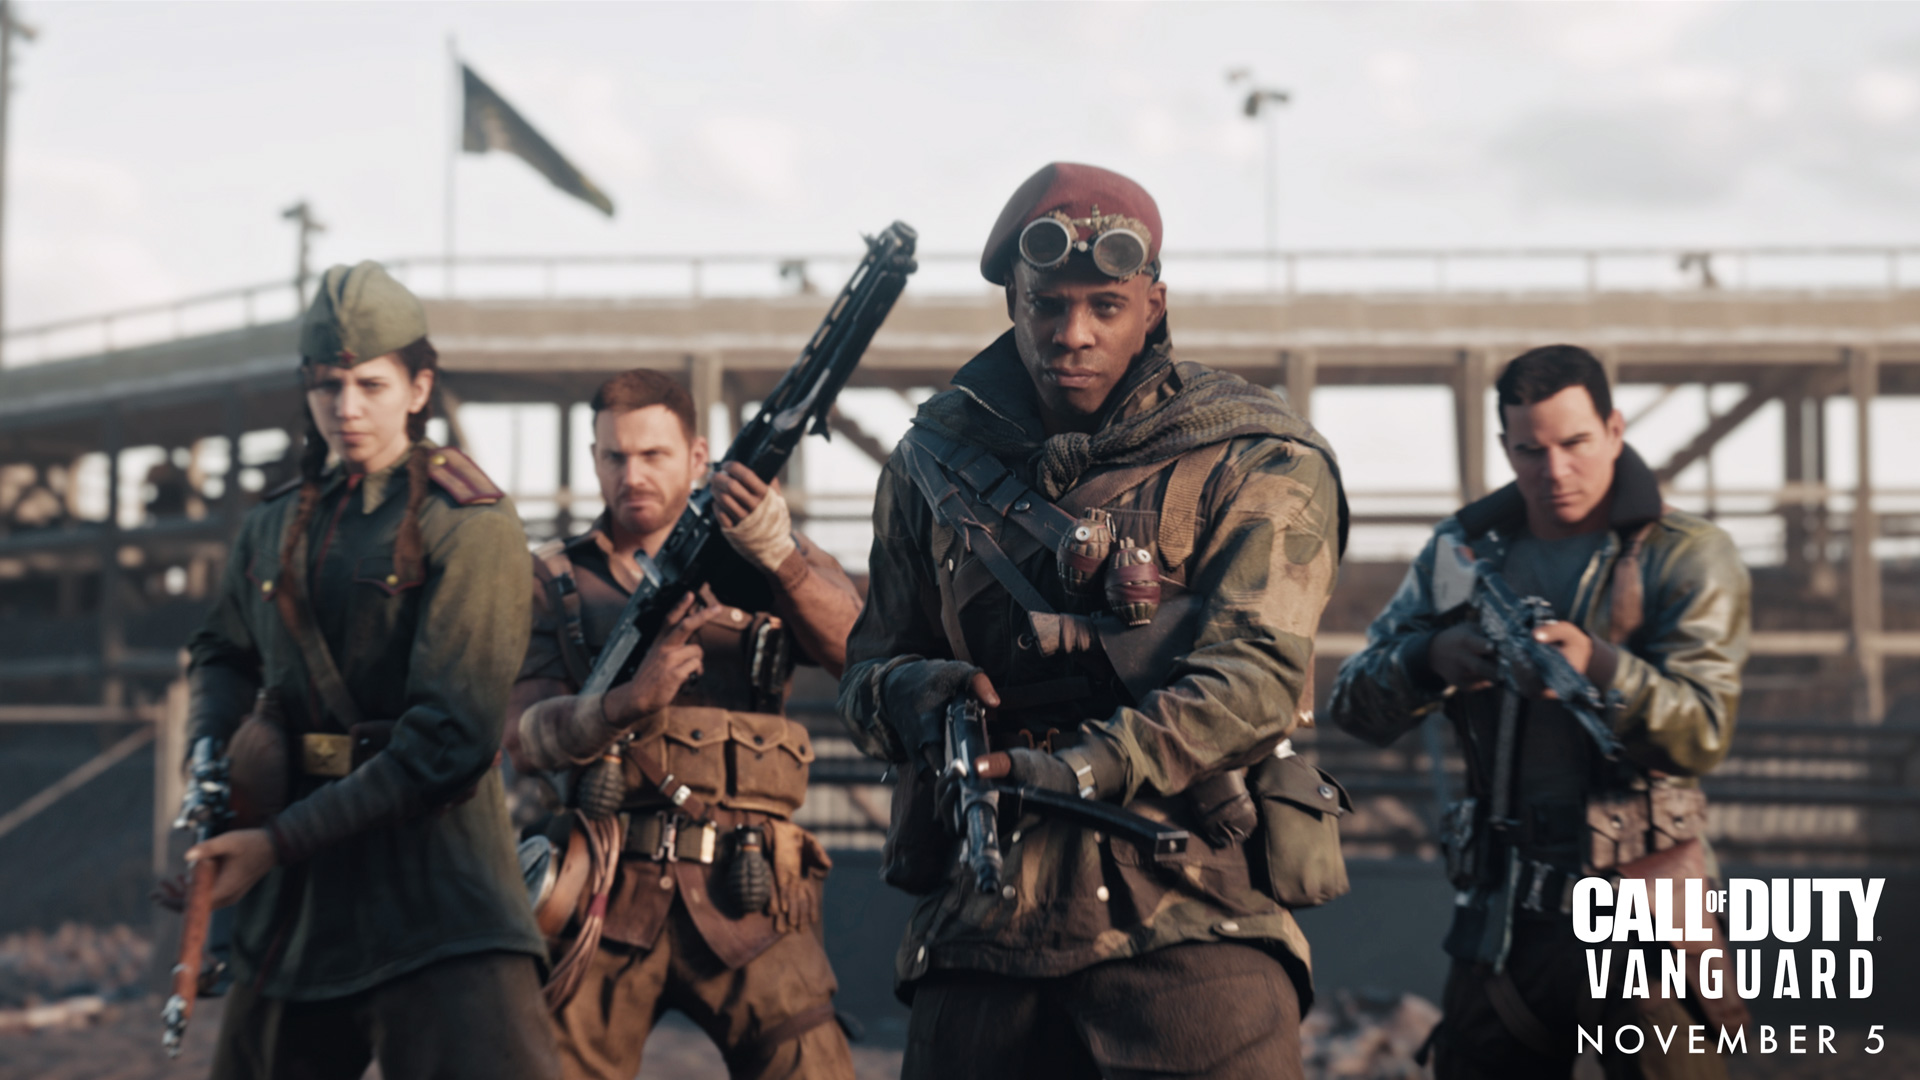 Call of Duty: Vanguard': New strategy focuses video game on diversity